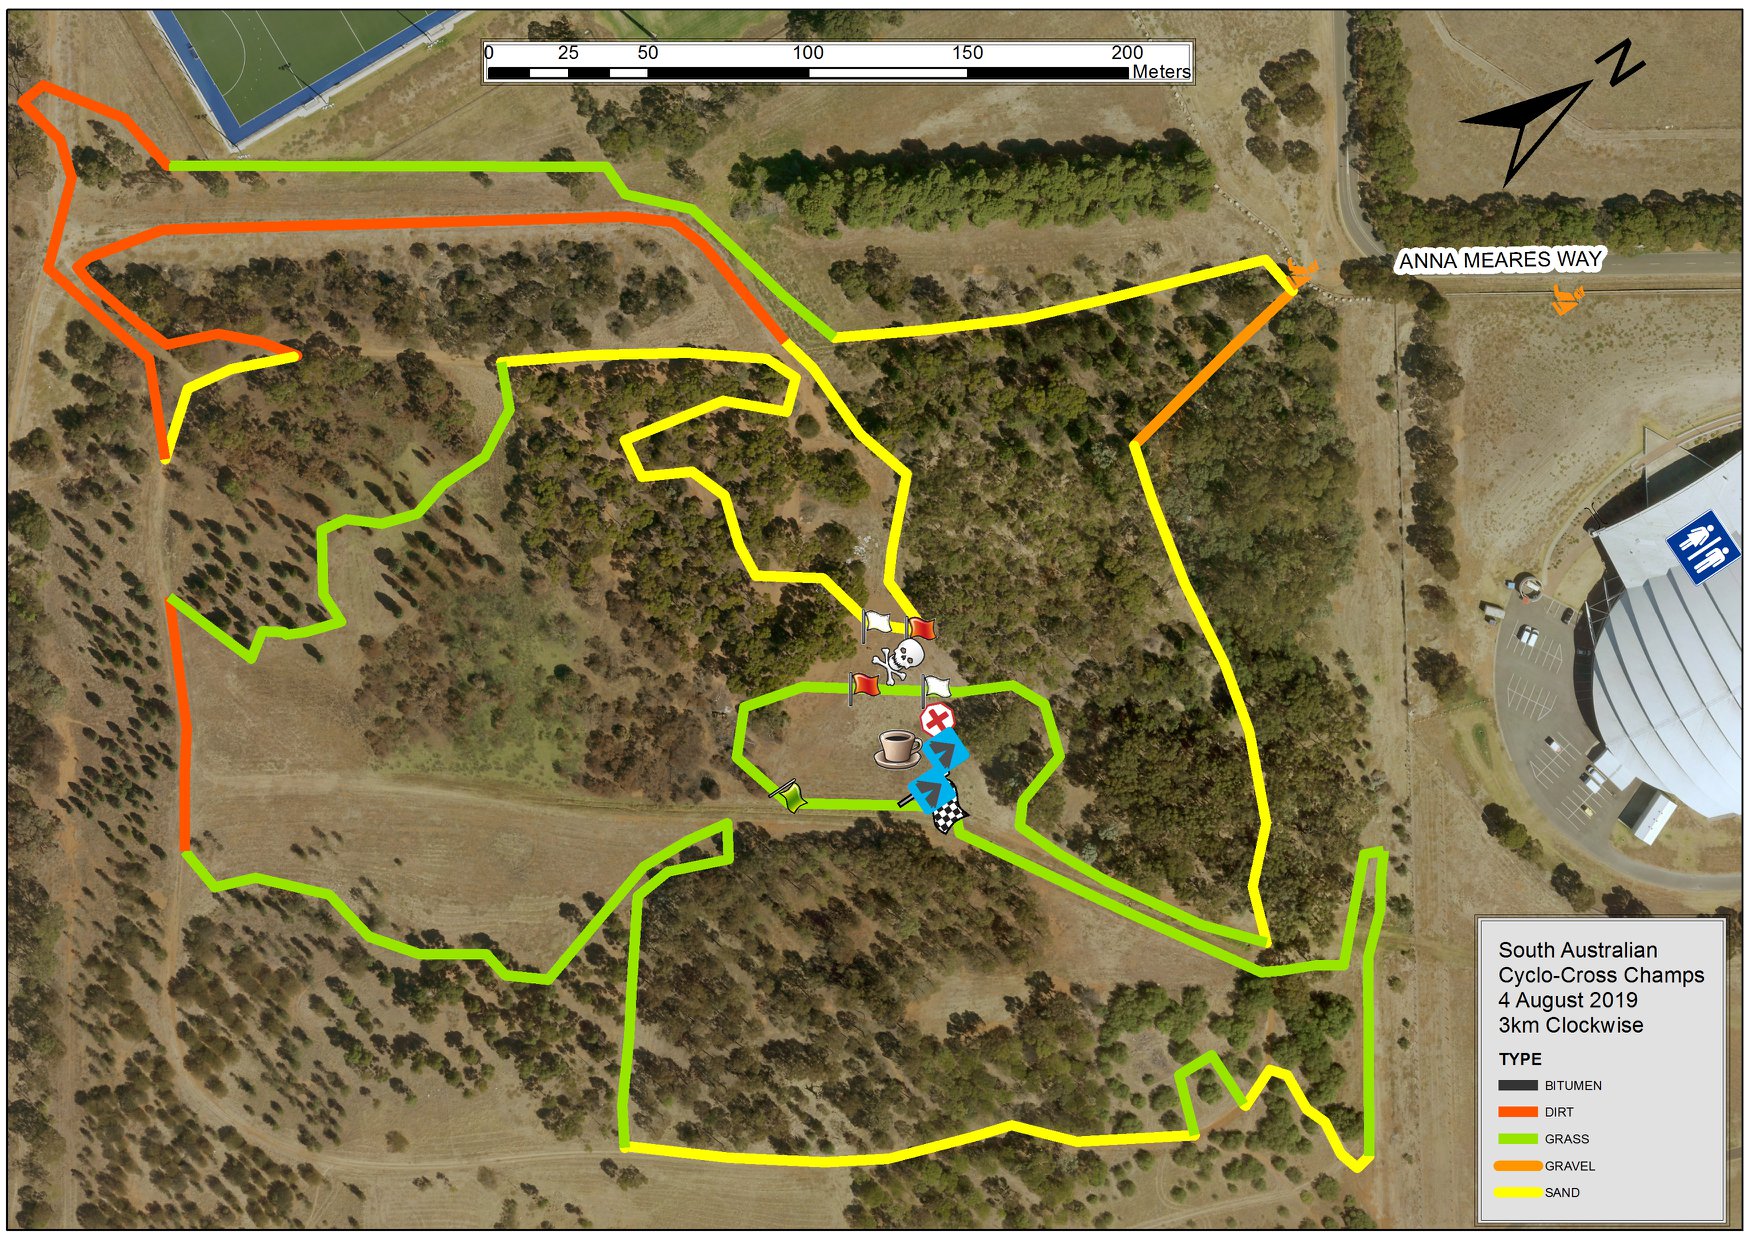 2019 South Australian State Cyclo-Cross Championships - Course Map